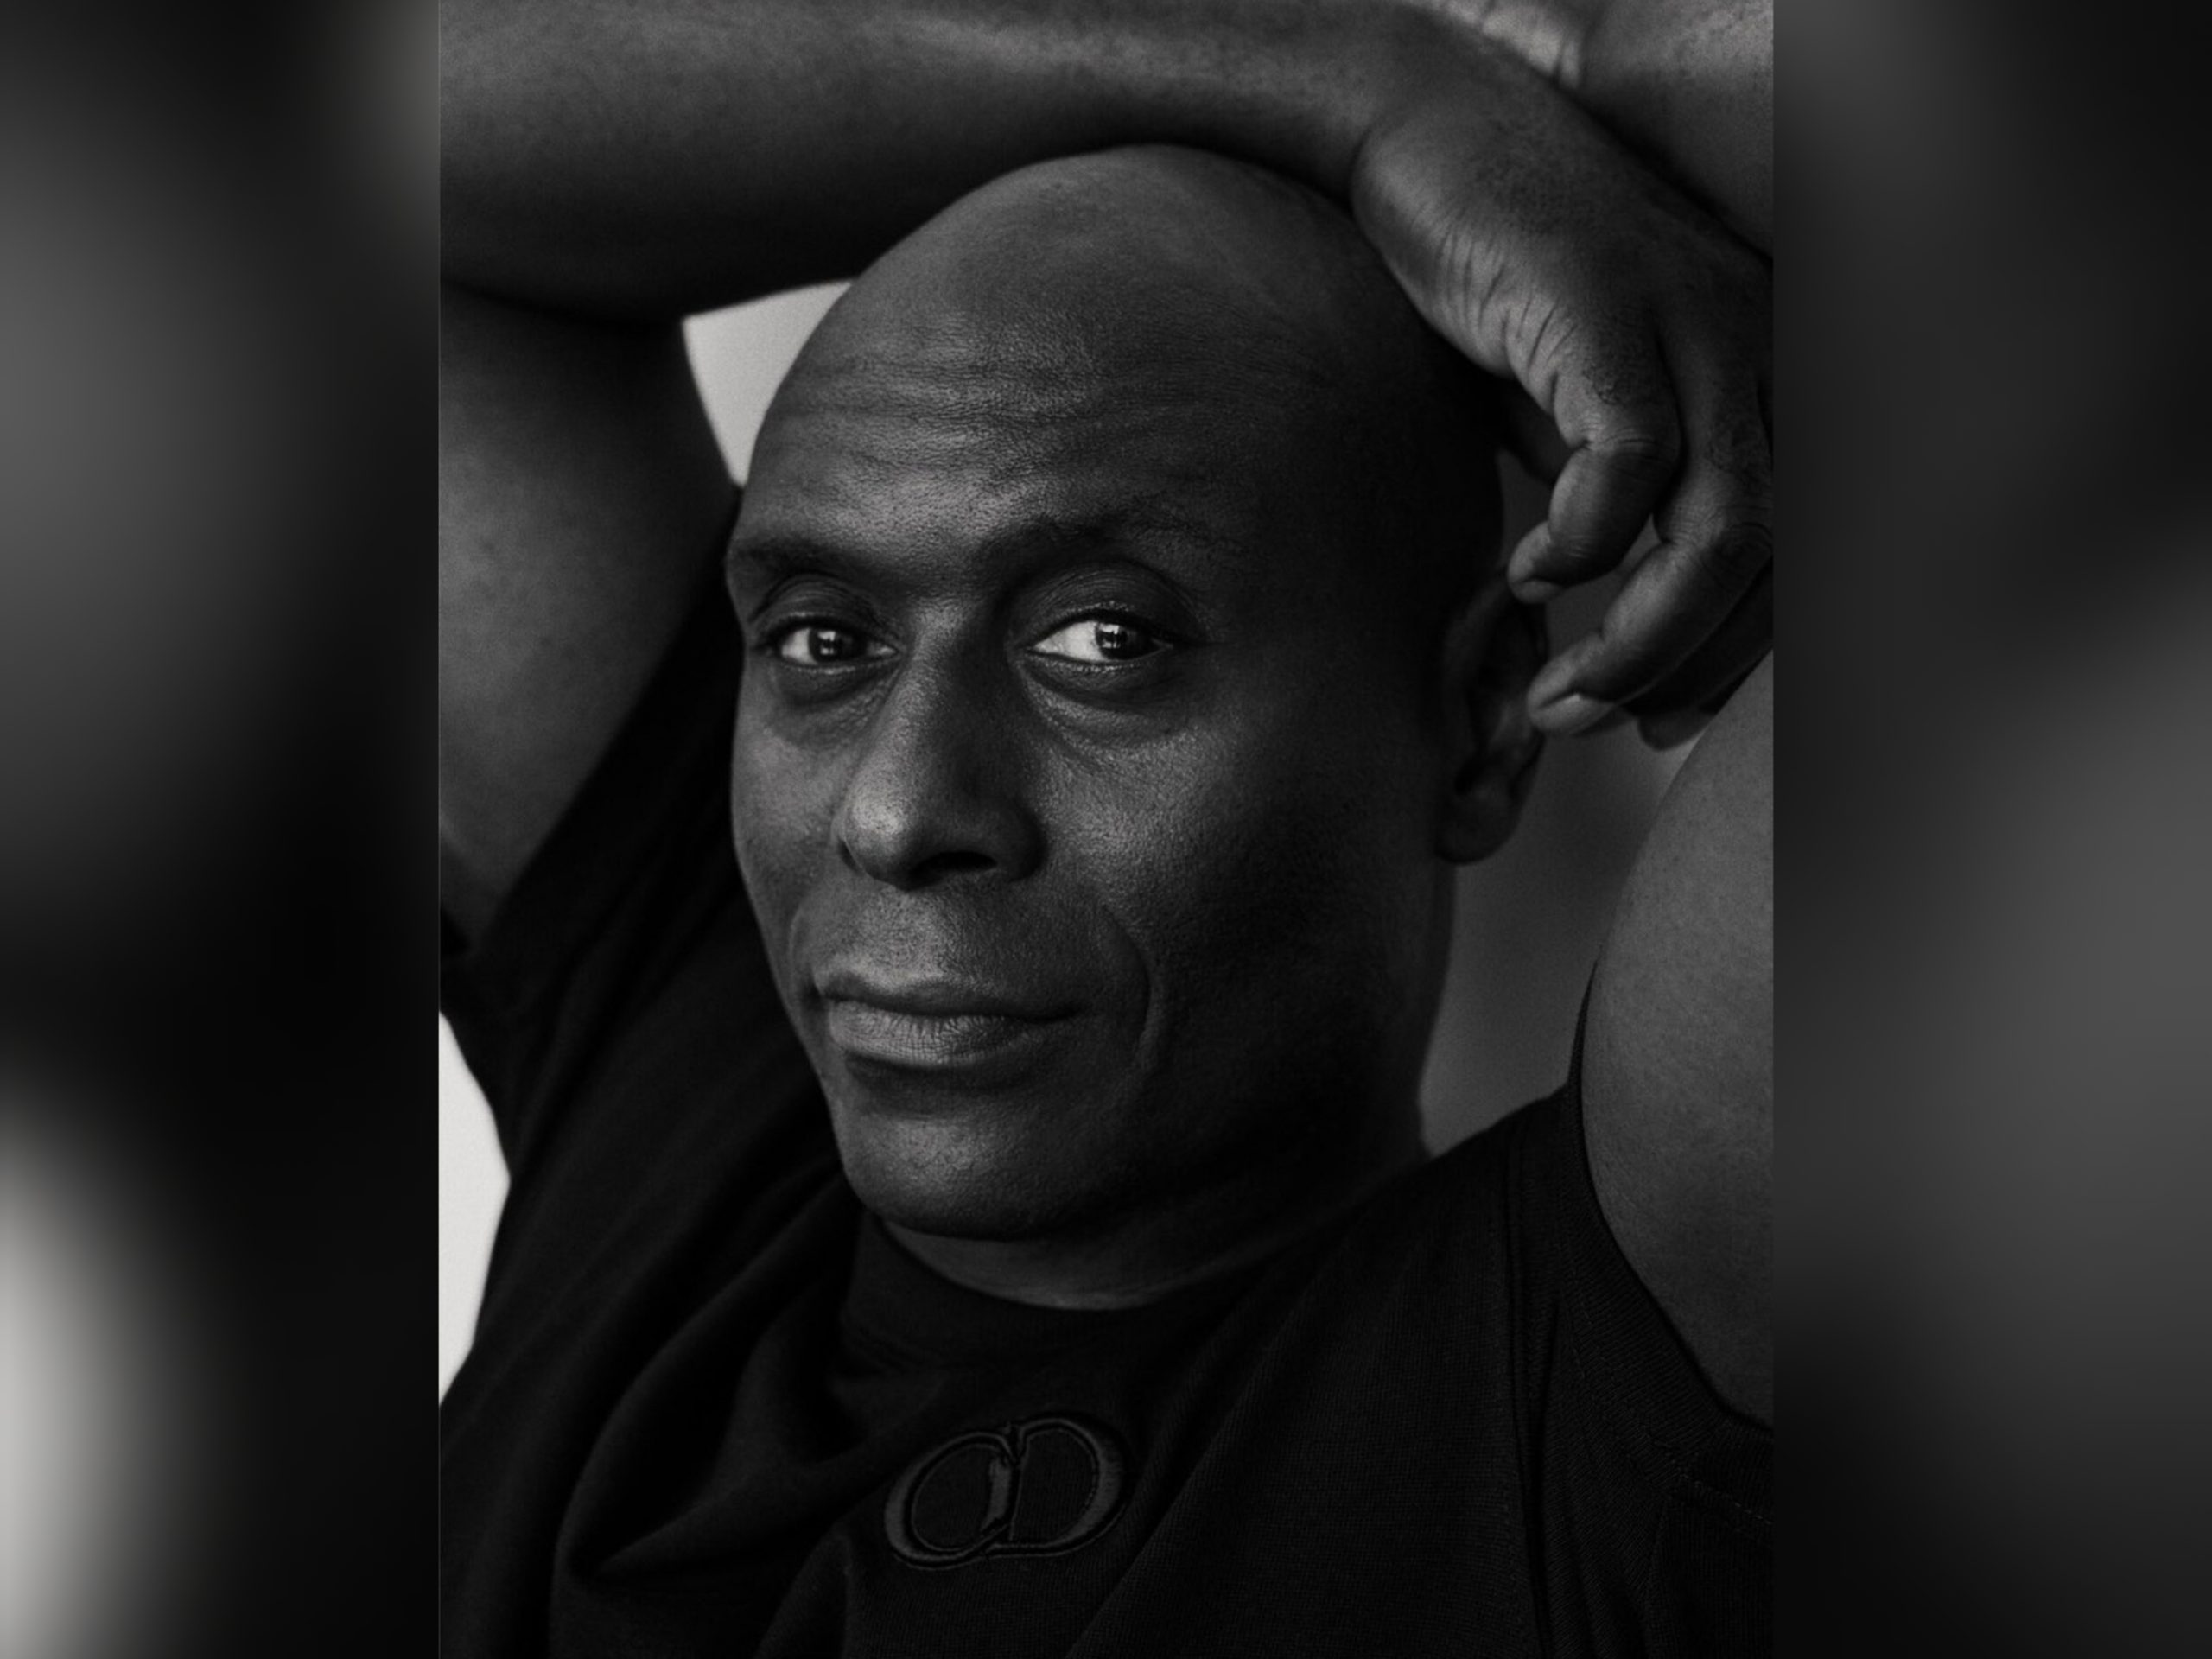 Lance Reddick Cause of Death Revealed: Heart and Artery Disease